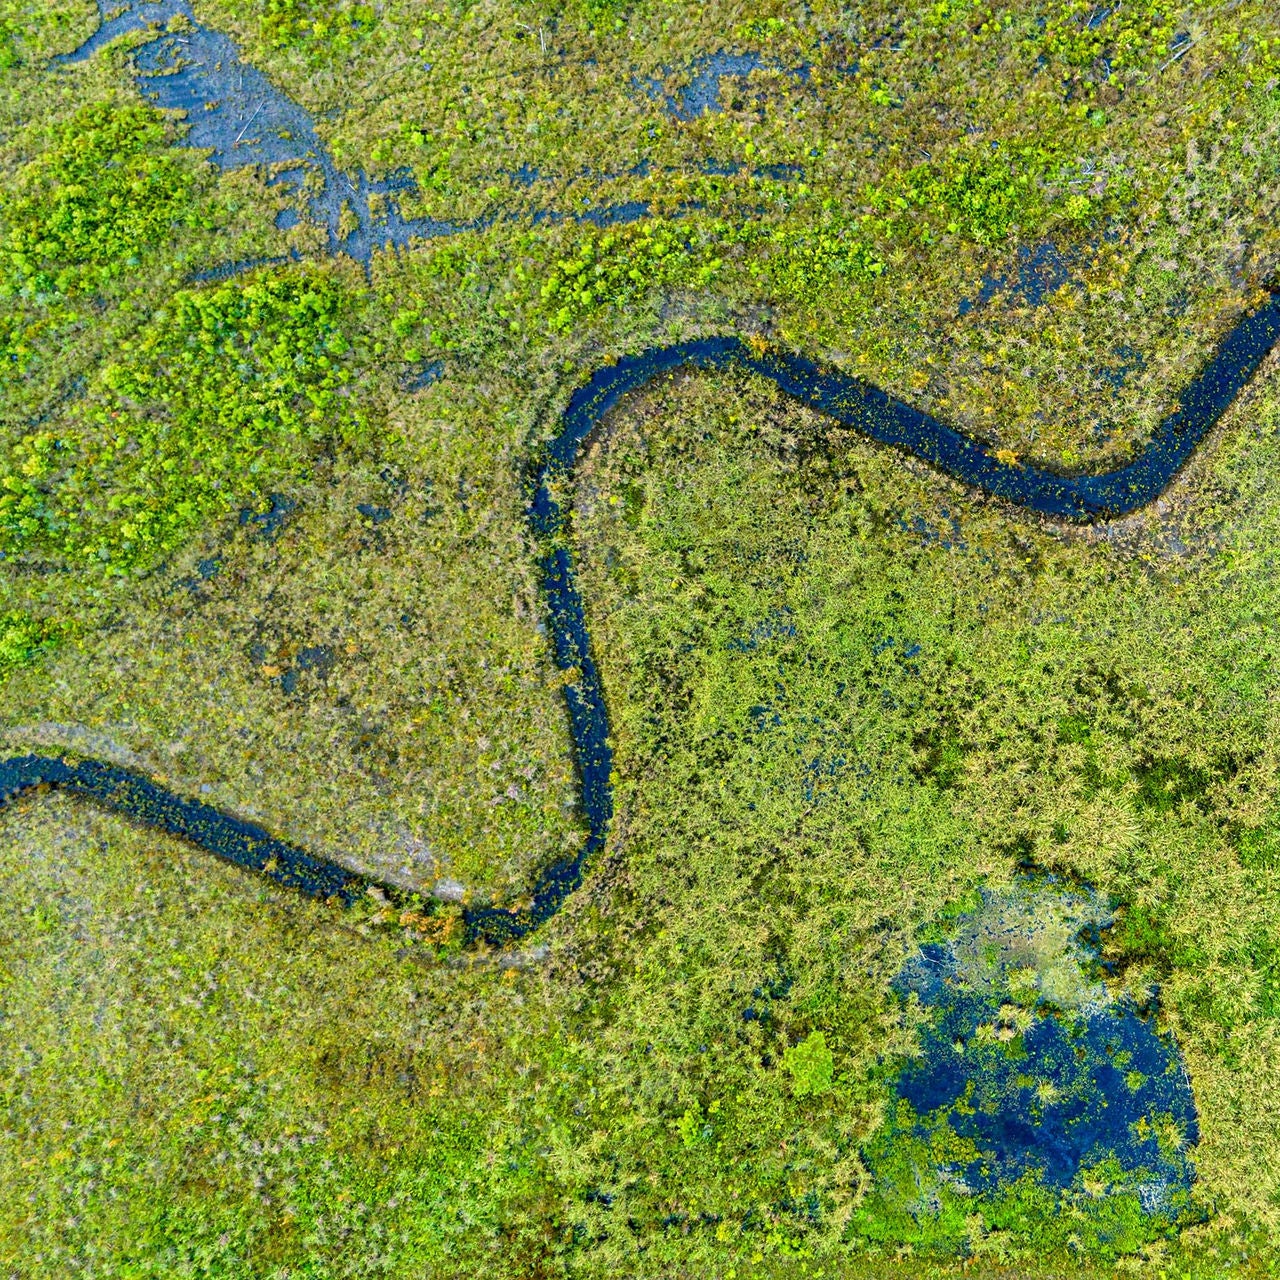 Aerial view of a river snaking through a wetlands showing all aspects of a railroad network